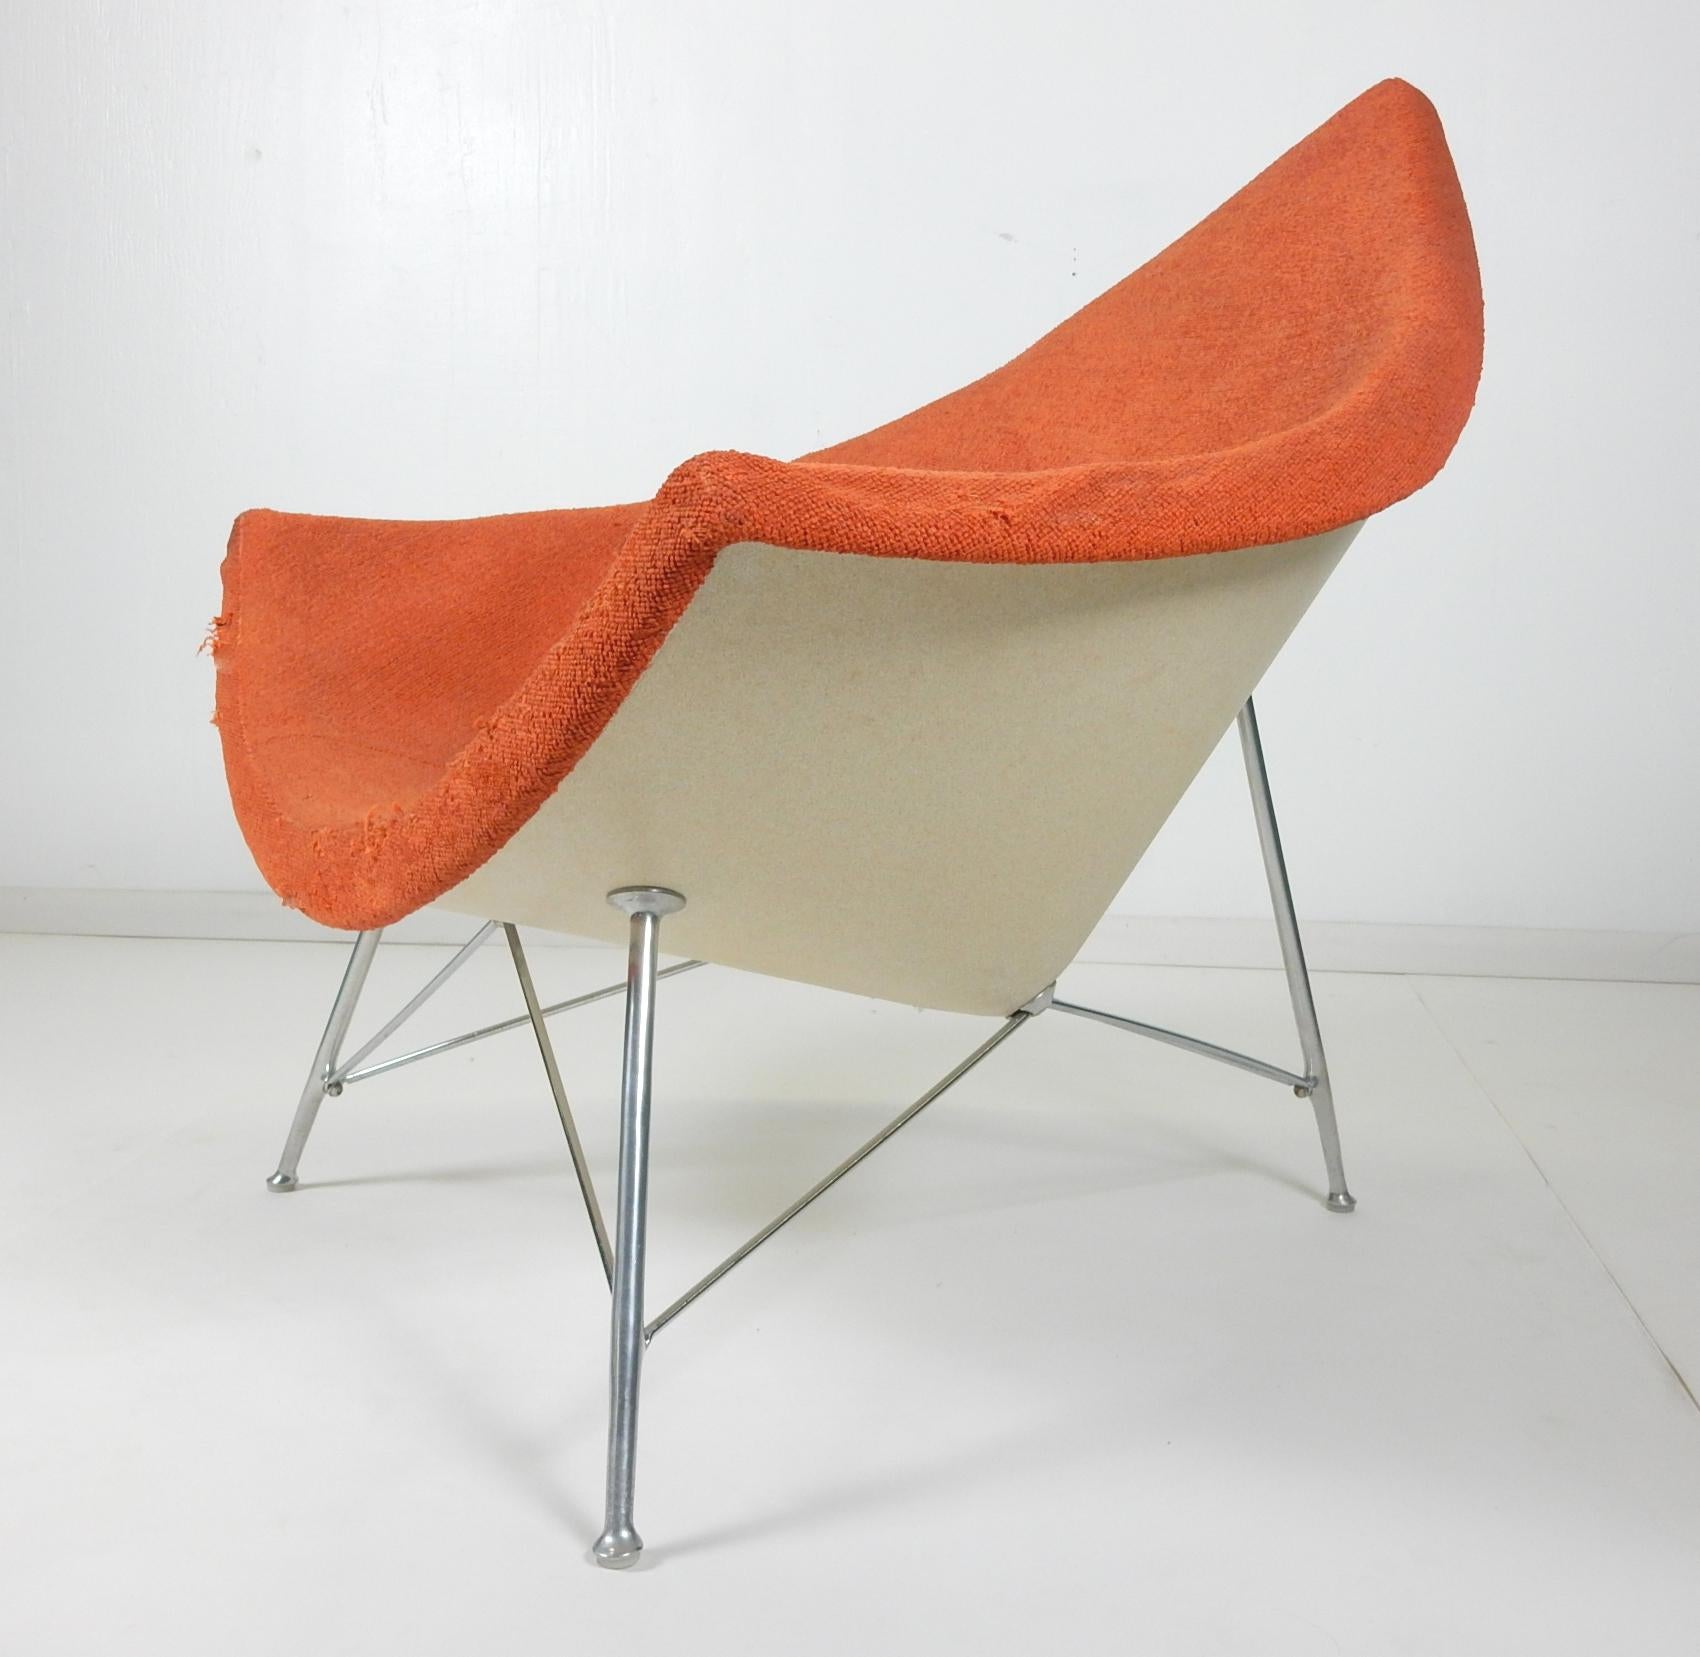 Early metal shell George Nelson's design for Herman Miller coconut lounge chair.
Aluminum legs. Original orange Knoll fabric.
Iconic chair ready to upholster in your favorite fabric. 